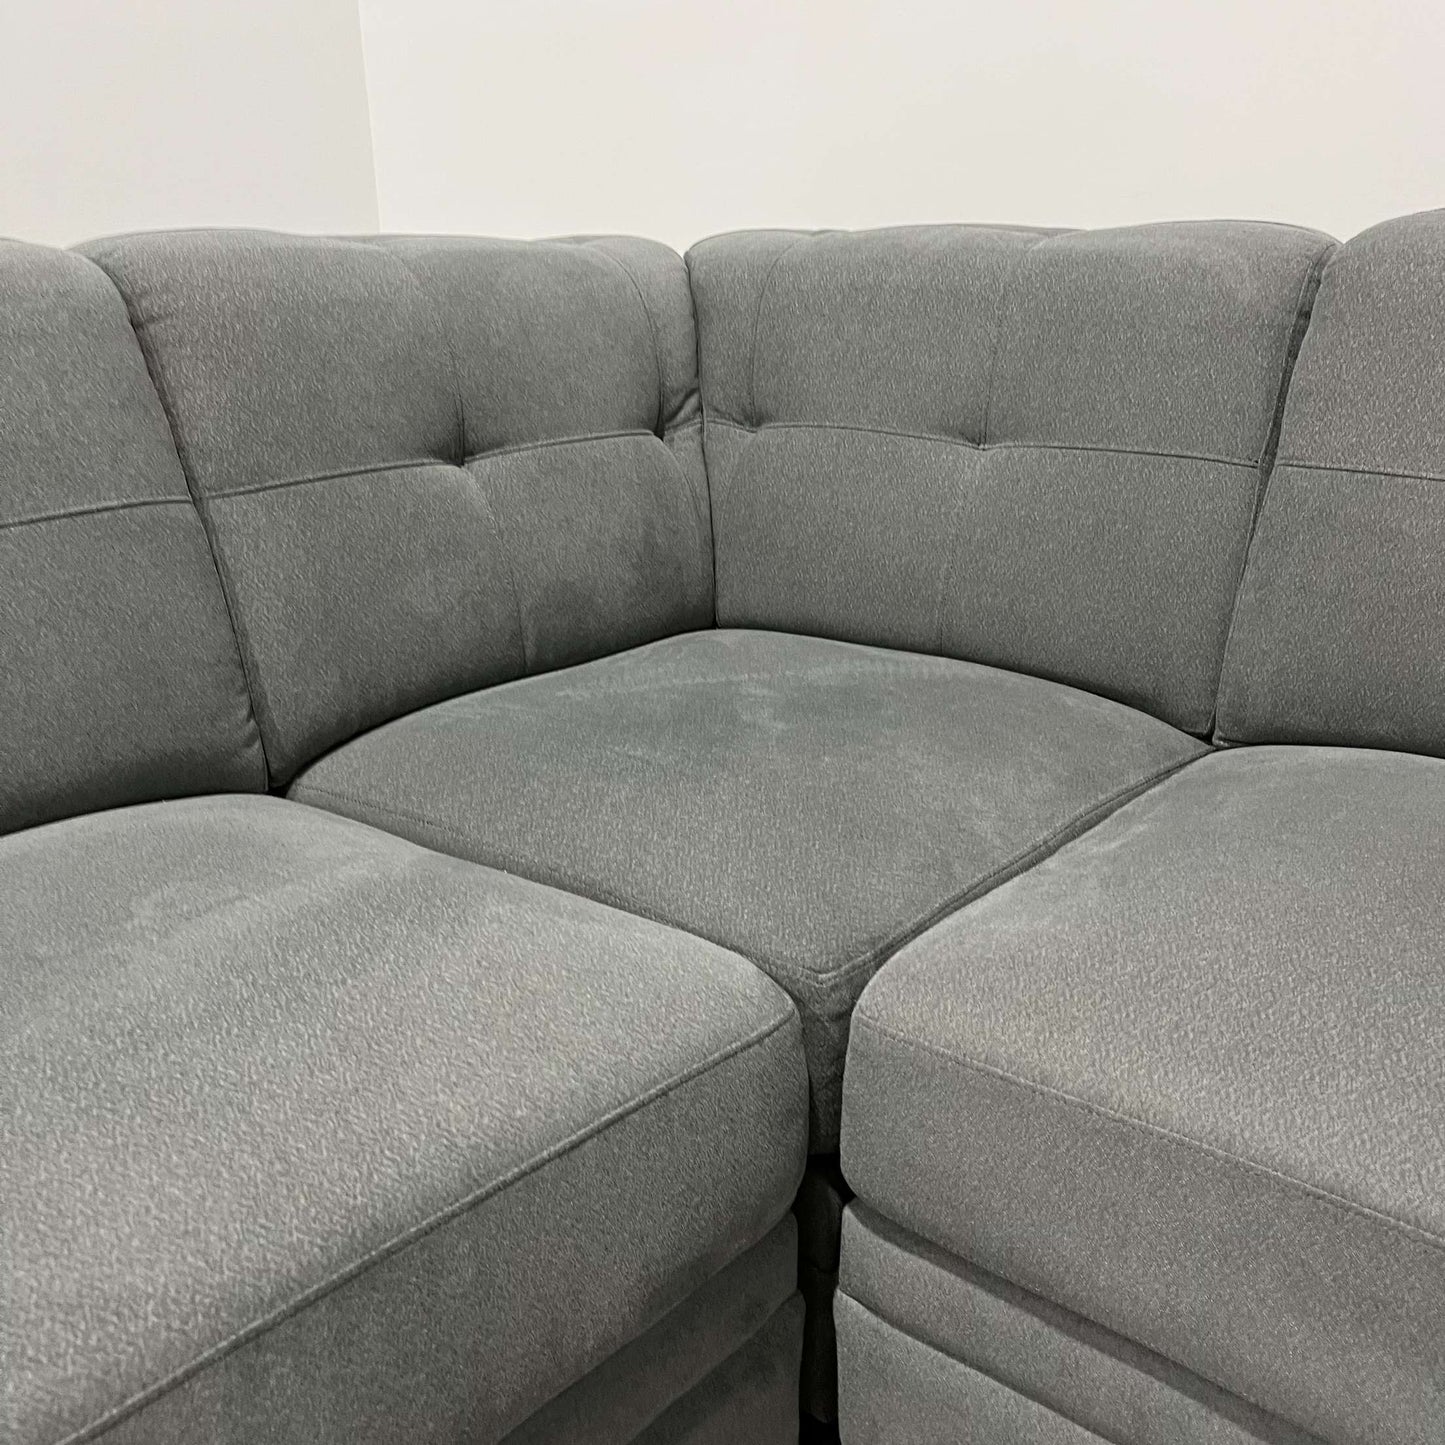 5 Piece Modular Sectional Couch (Costco)